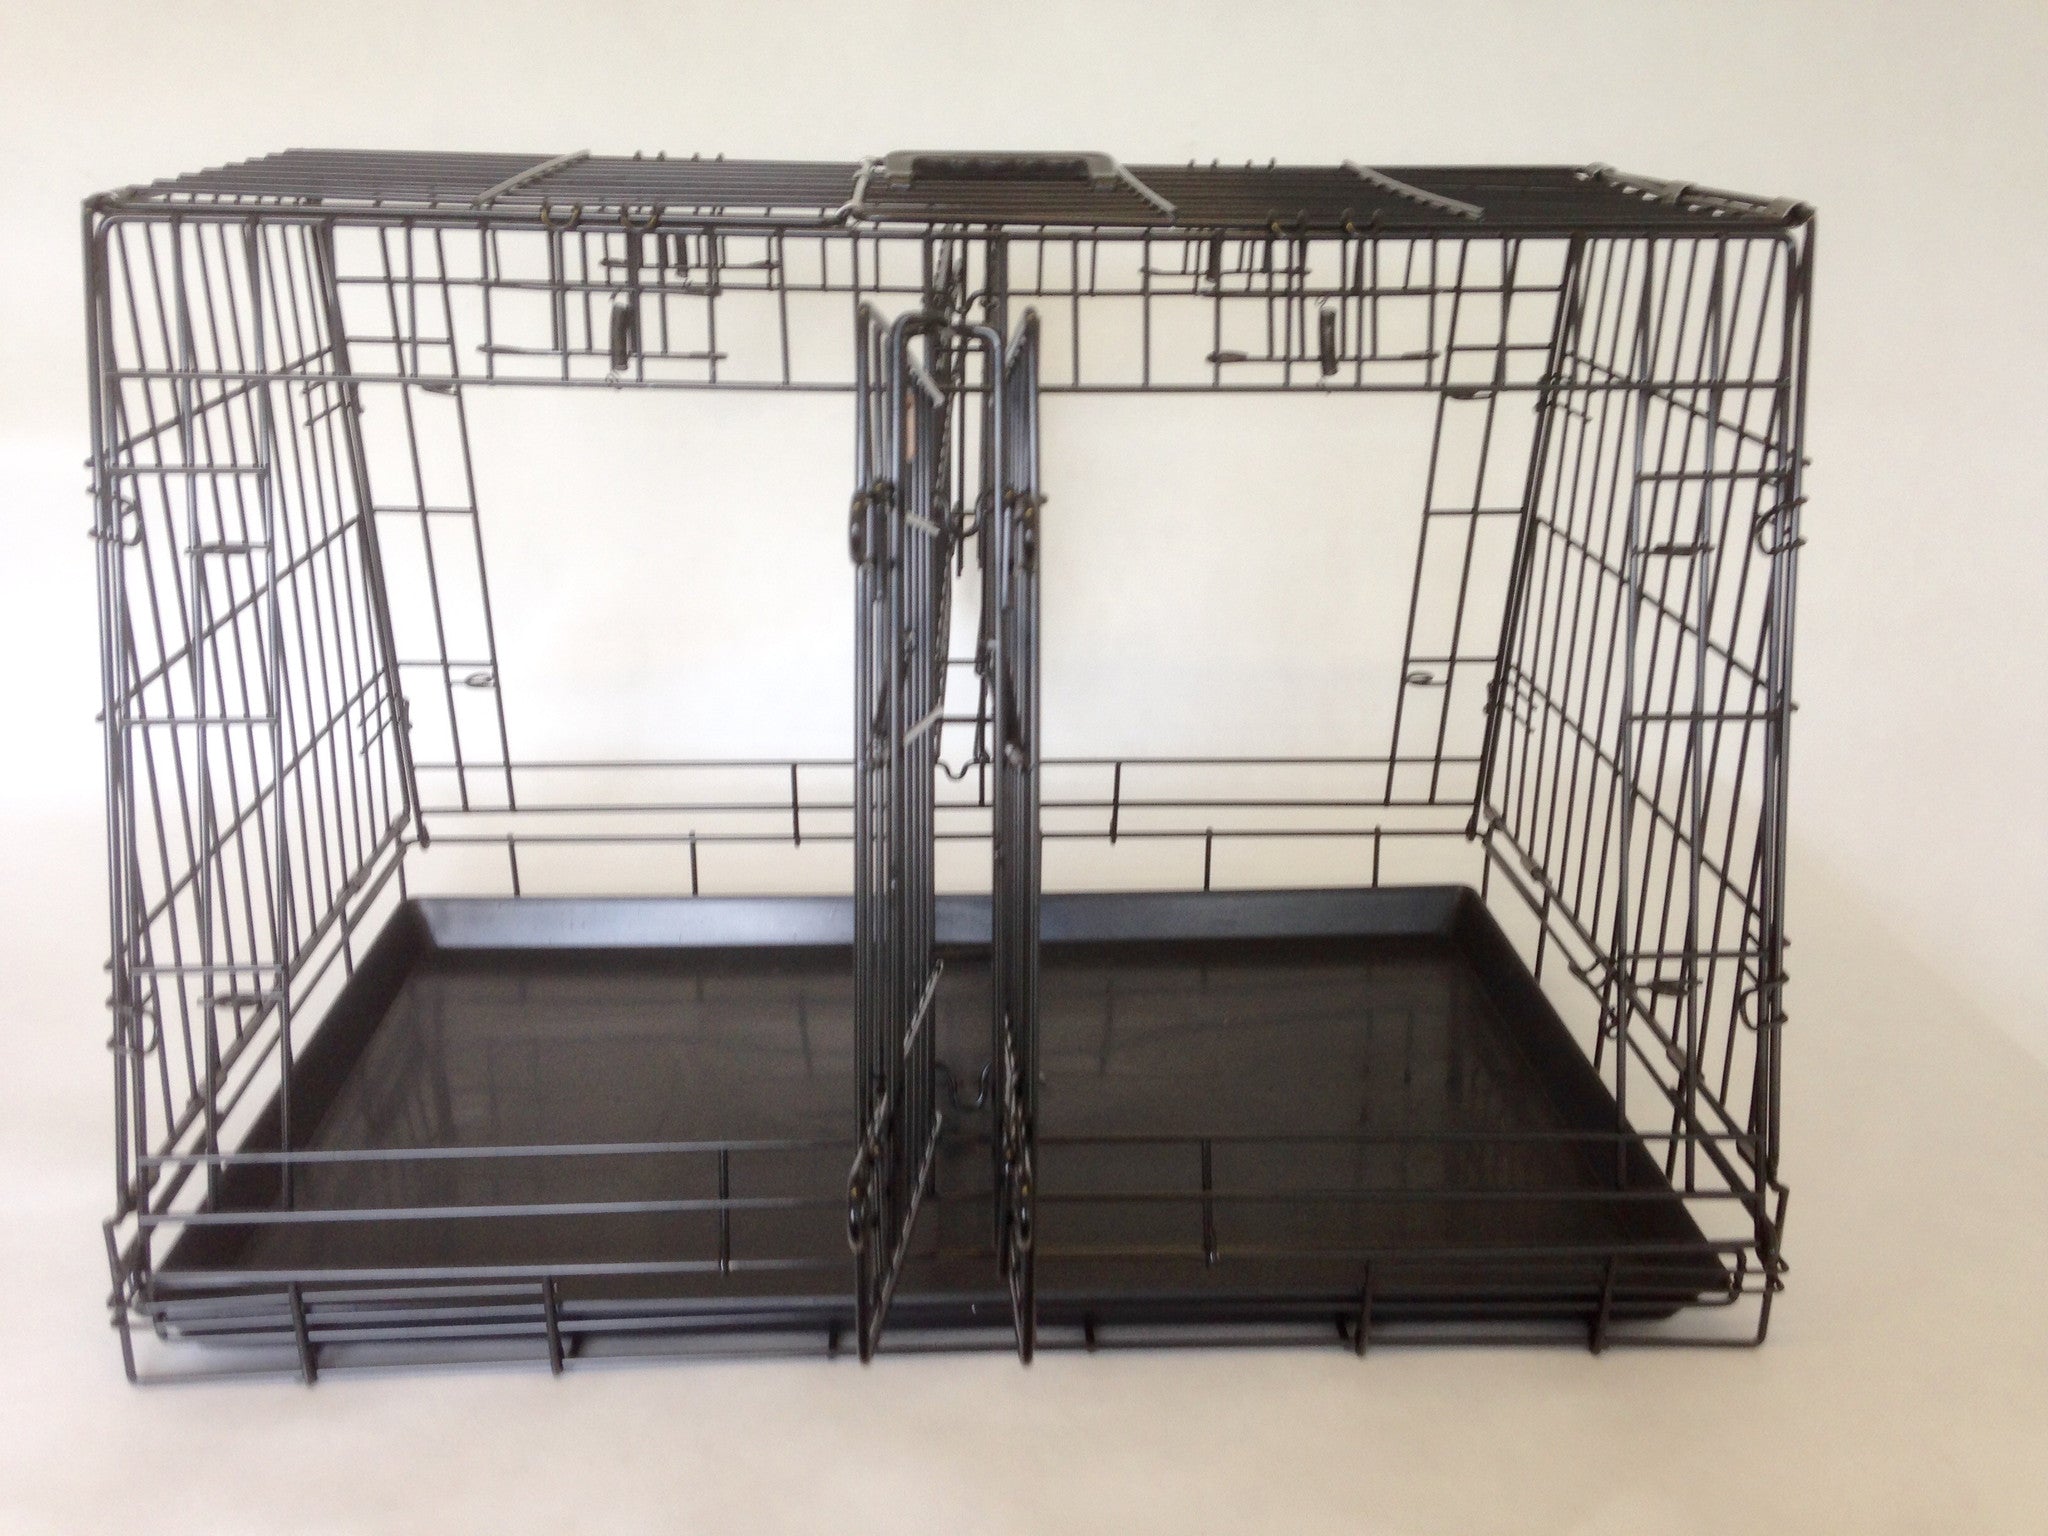 GYC03PF/04PF/03PT/04PT Double Car Crate with Divider.